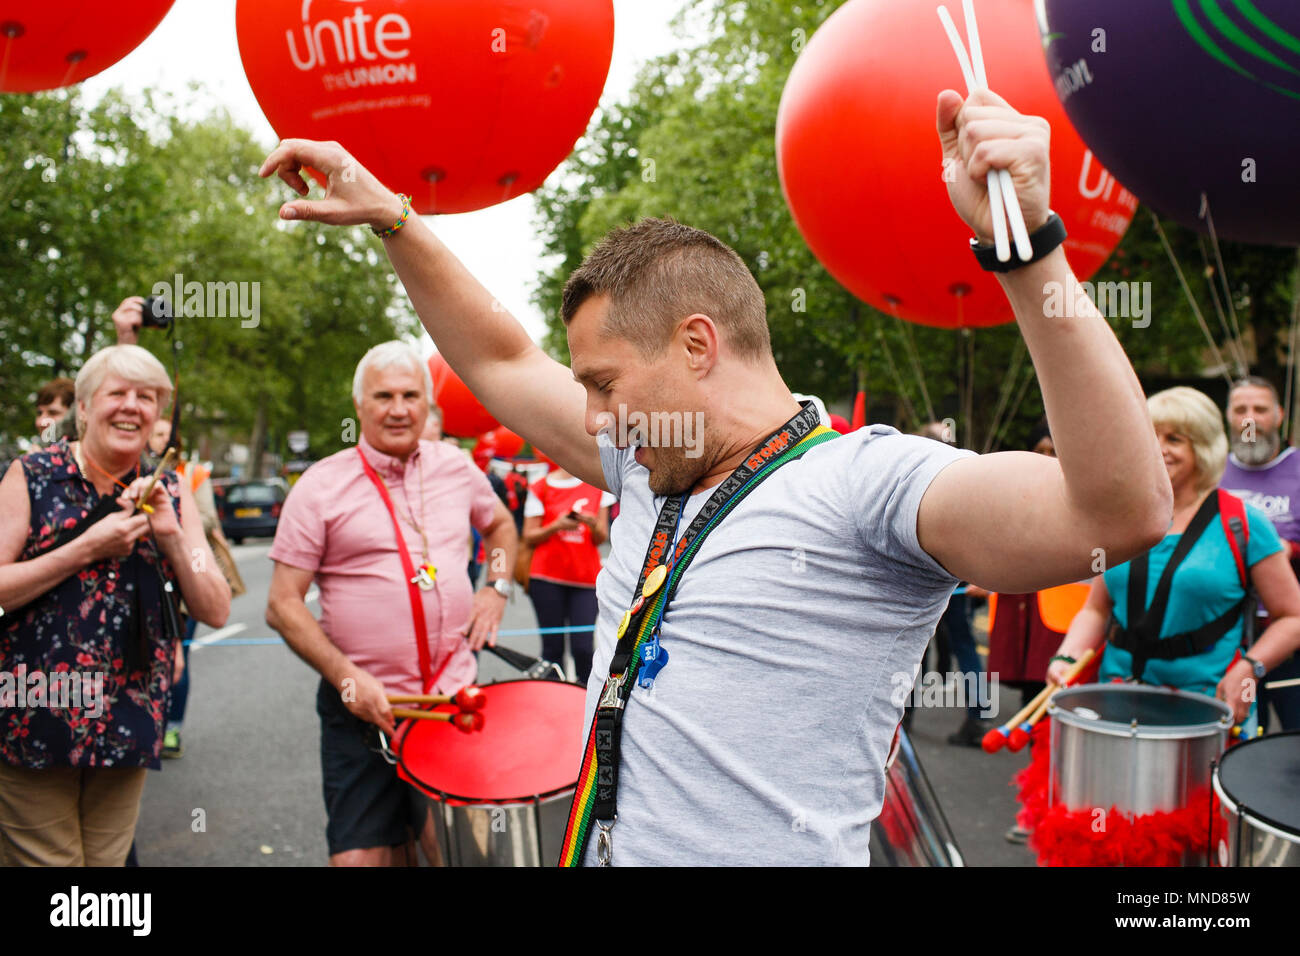 A drummer dances amidst his bandmates as demonstrators calling for fairer pay and rights for workers, as well as against public service cuts and workplace discrimination, gather on Victoria Embankment ahead of the 'New Deal for Working People' march organised by the Trades Union Congress (TUC). Stock Photo